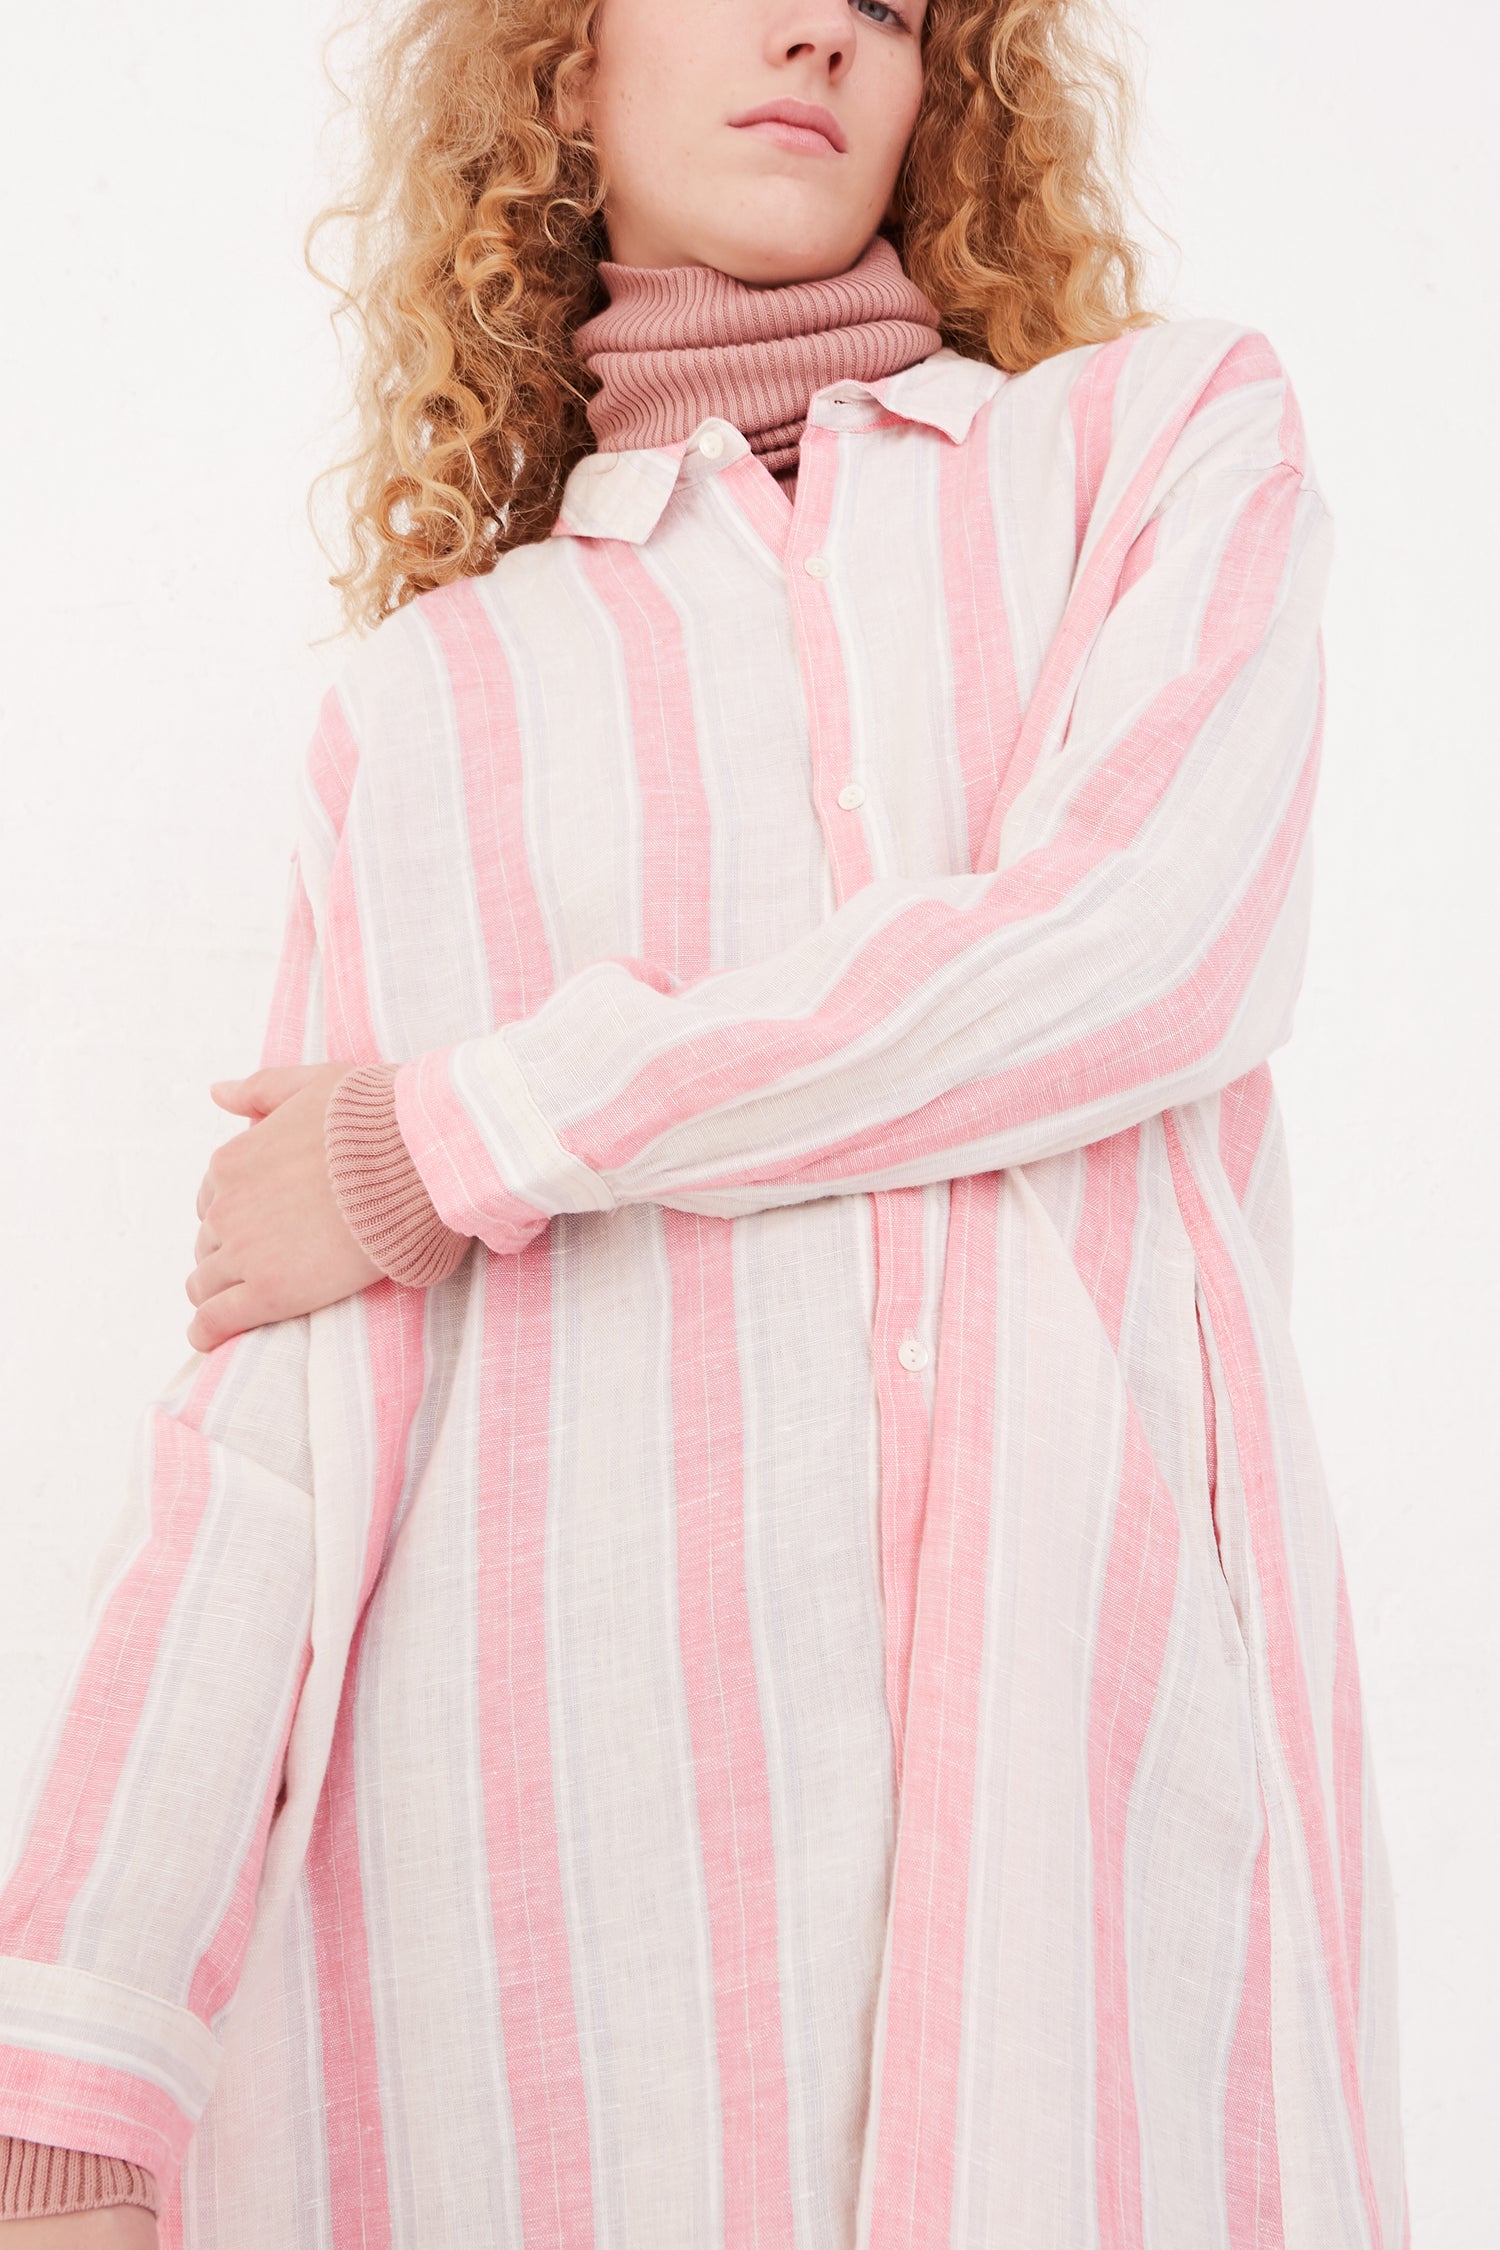 A woman wearing the Linen Stripe Dress in Pink by Ichi Antiquités.